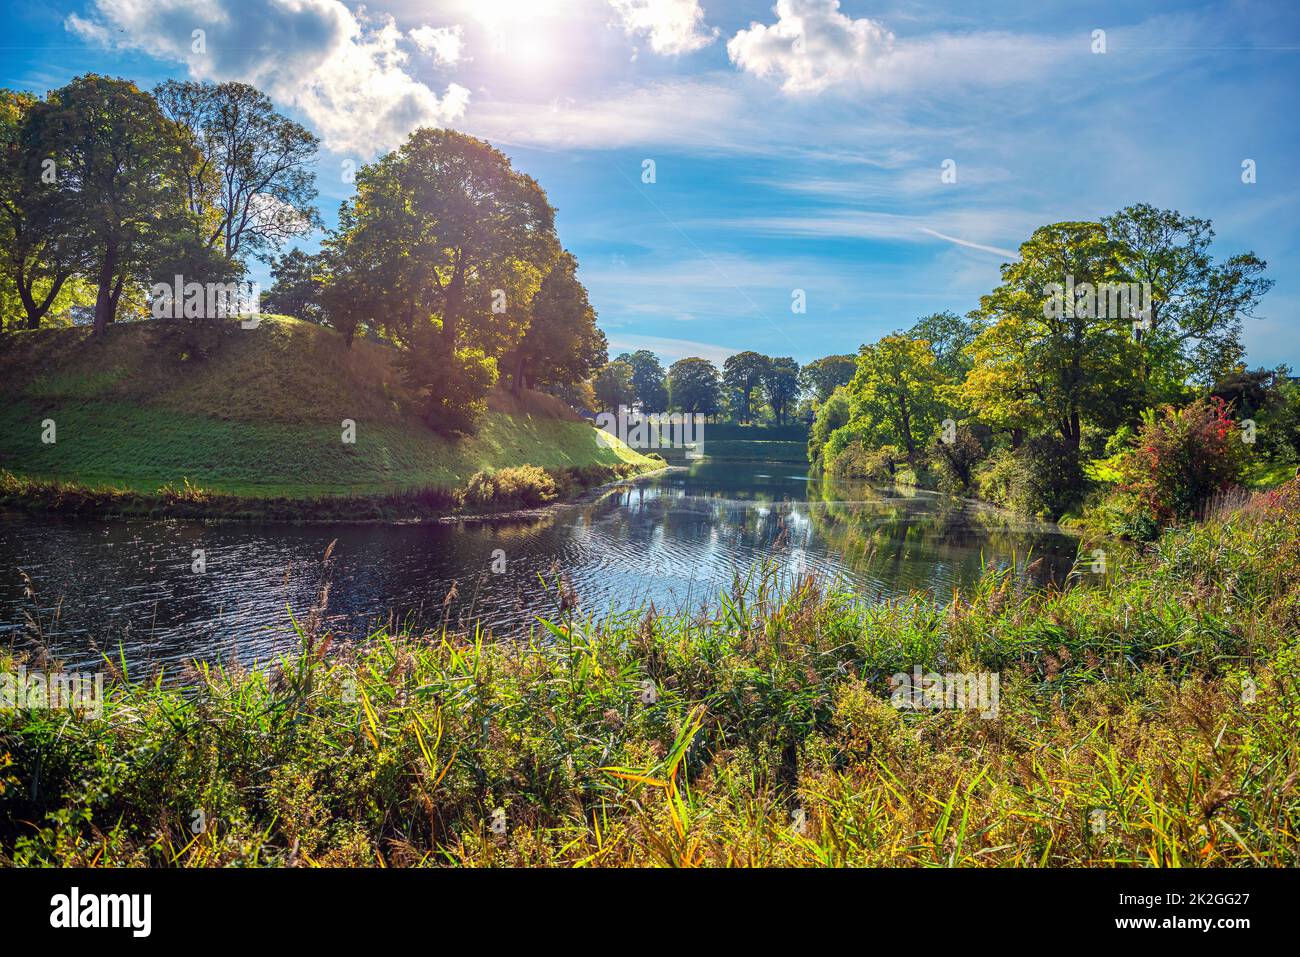 High hills with grass, trees and a river between them in the park that surrounds the fortress citadel Kastellet. Copenhagen, Denmark Stock Photo